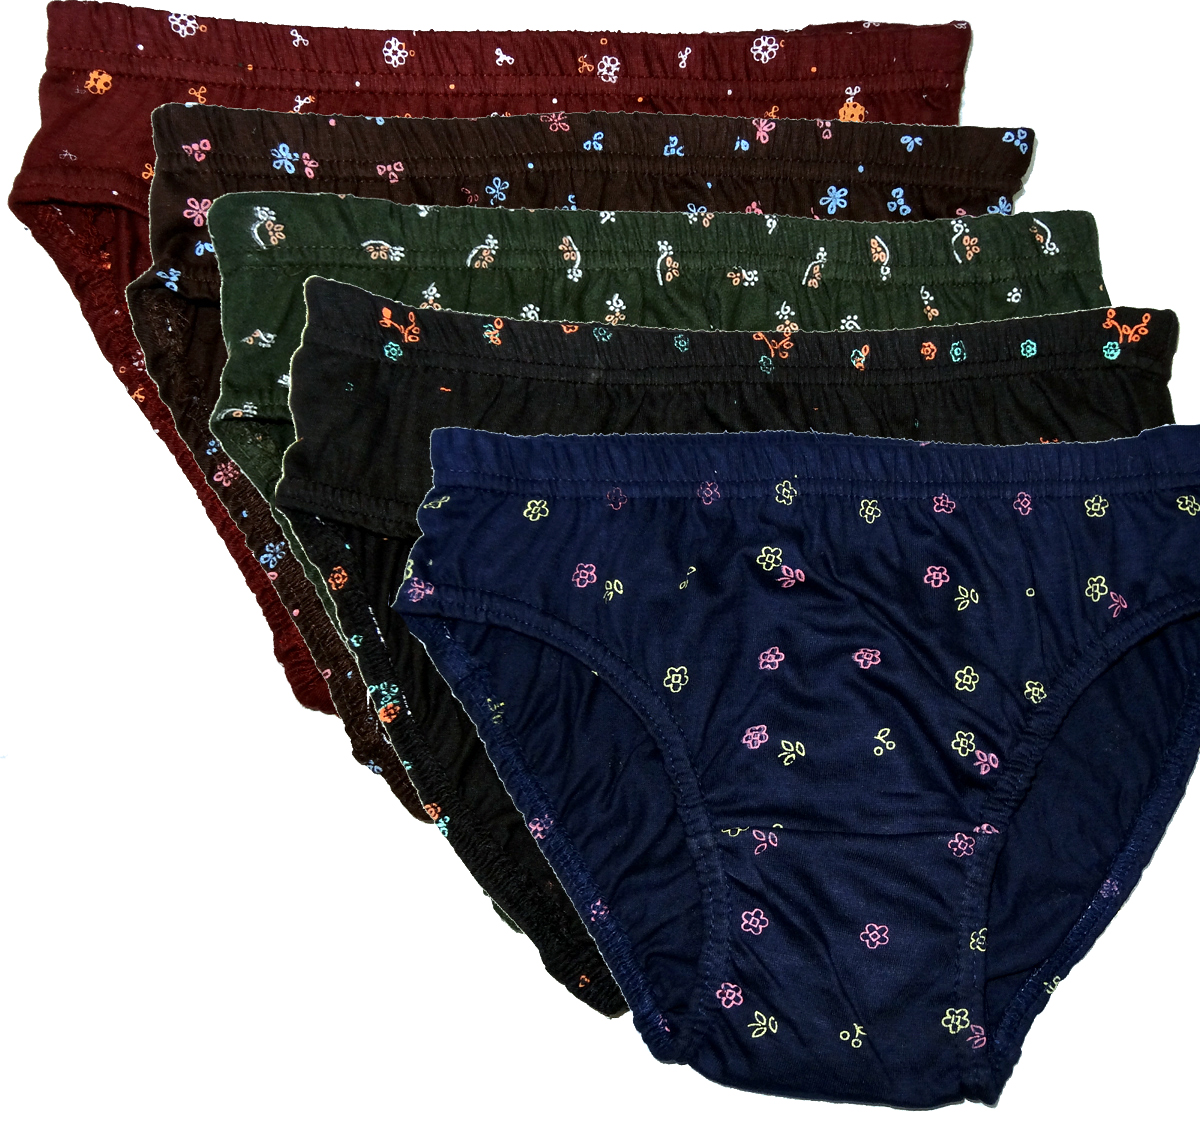 Buy Alfa Prity Womens Hipster Cotton Print Panty Pack Of 5 Assorted Color Online ₹954 From